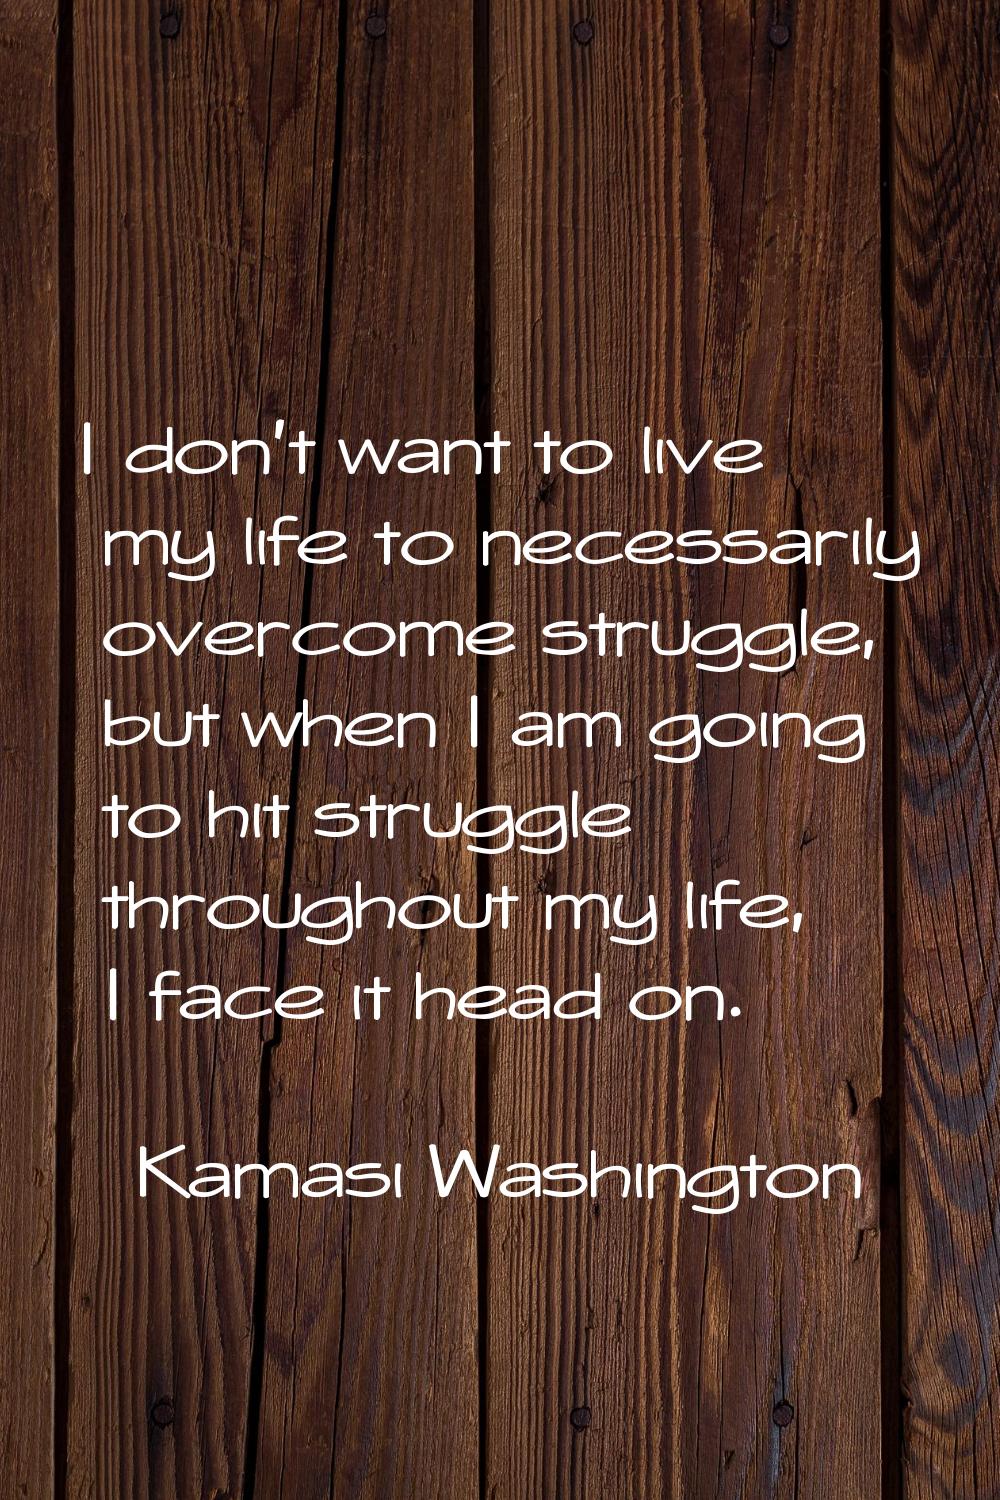 I don't want to live my life to necessarily overcome struggle, but when I am going to hit struggle 